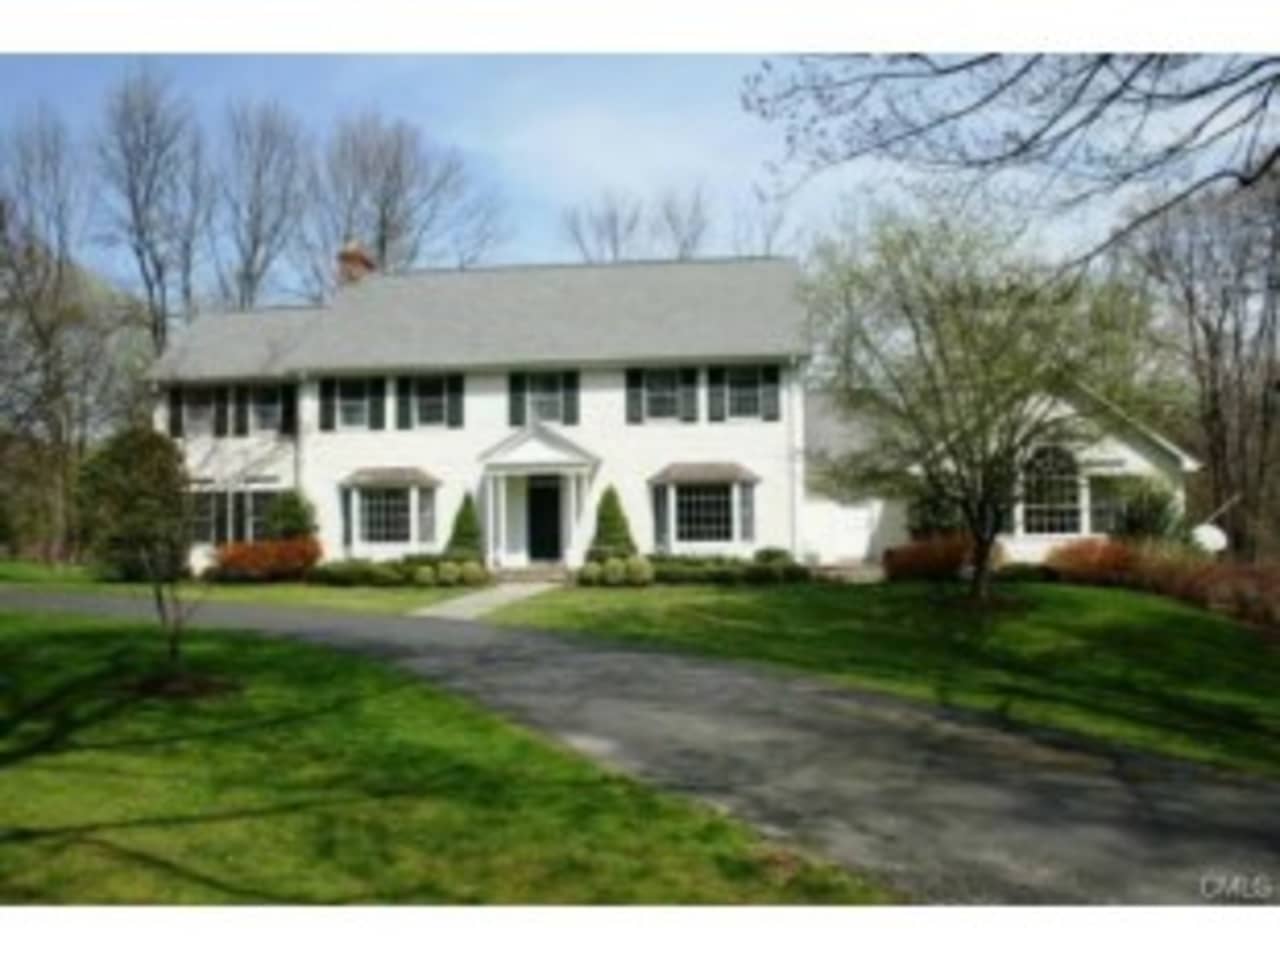 The home at 595 Smith Ridge Road in New Canaan recently sold for $2.05 million. 